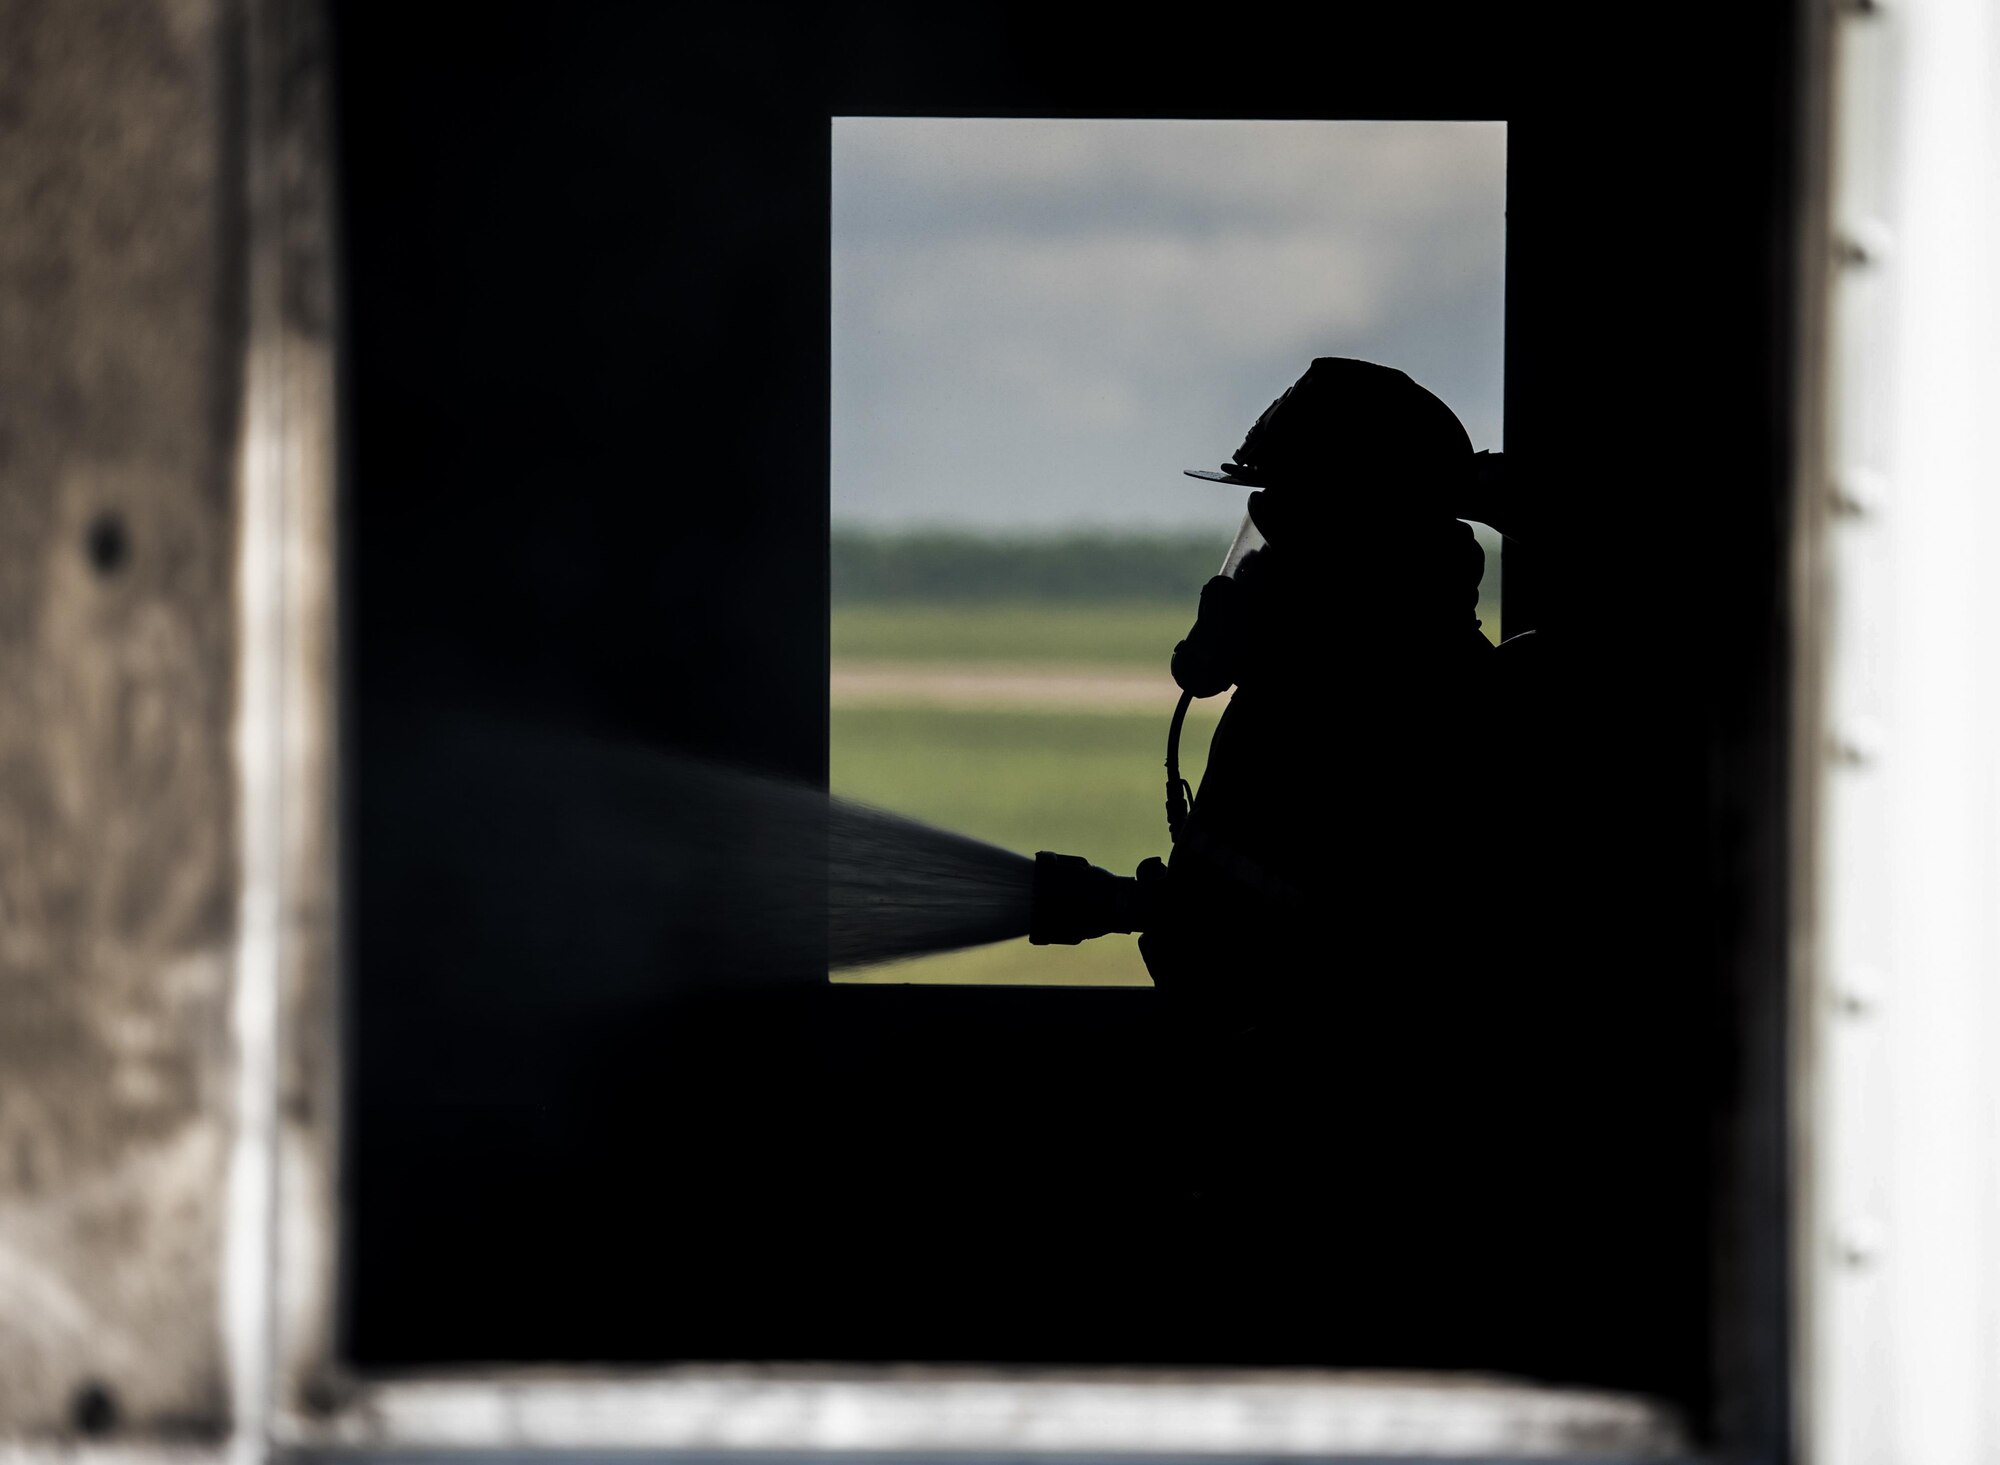 A U.S. Air Force firefighter assigned to the 6th Civil Engineer Squadron extinguishes a fire during a structural, live-burn exercise at MacDill Air Force Base, Fla., July 24, 2017. The exercise was conducted to show the behavior of a live fire inside a structure, and how to safely operate their equipment while in a burning building. (U.S. Air Force photo by Airman 1st Class Adam R. Shanks)
SrA Adams
